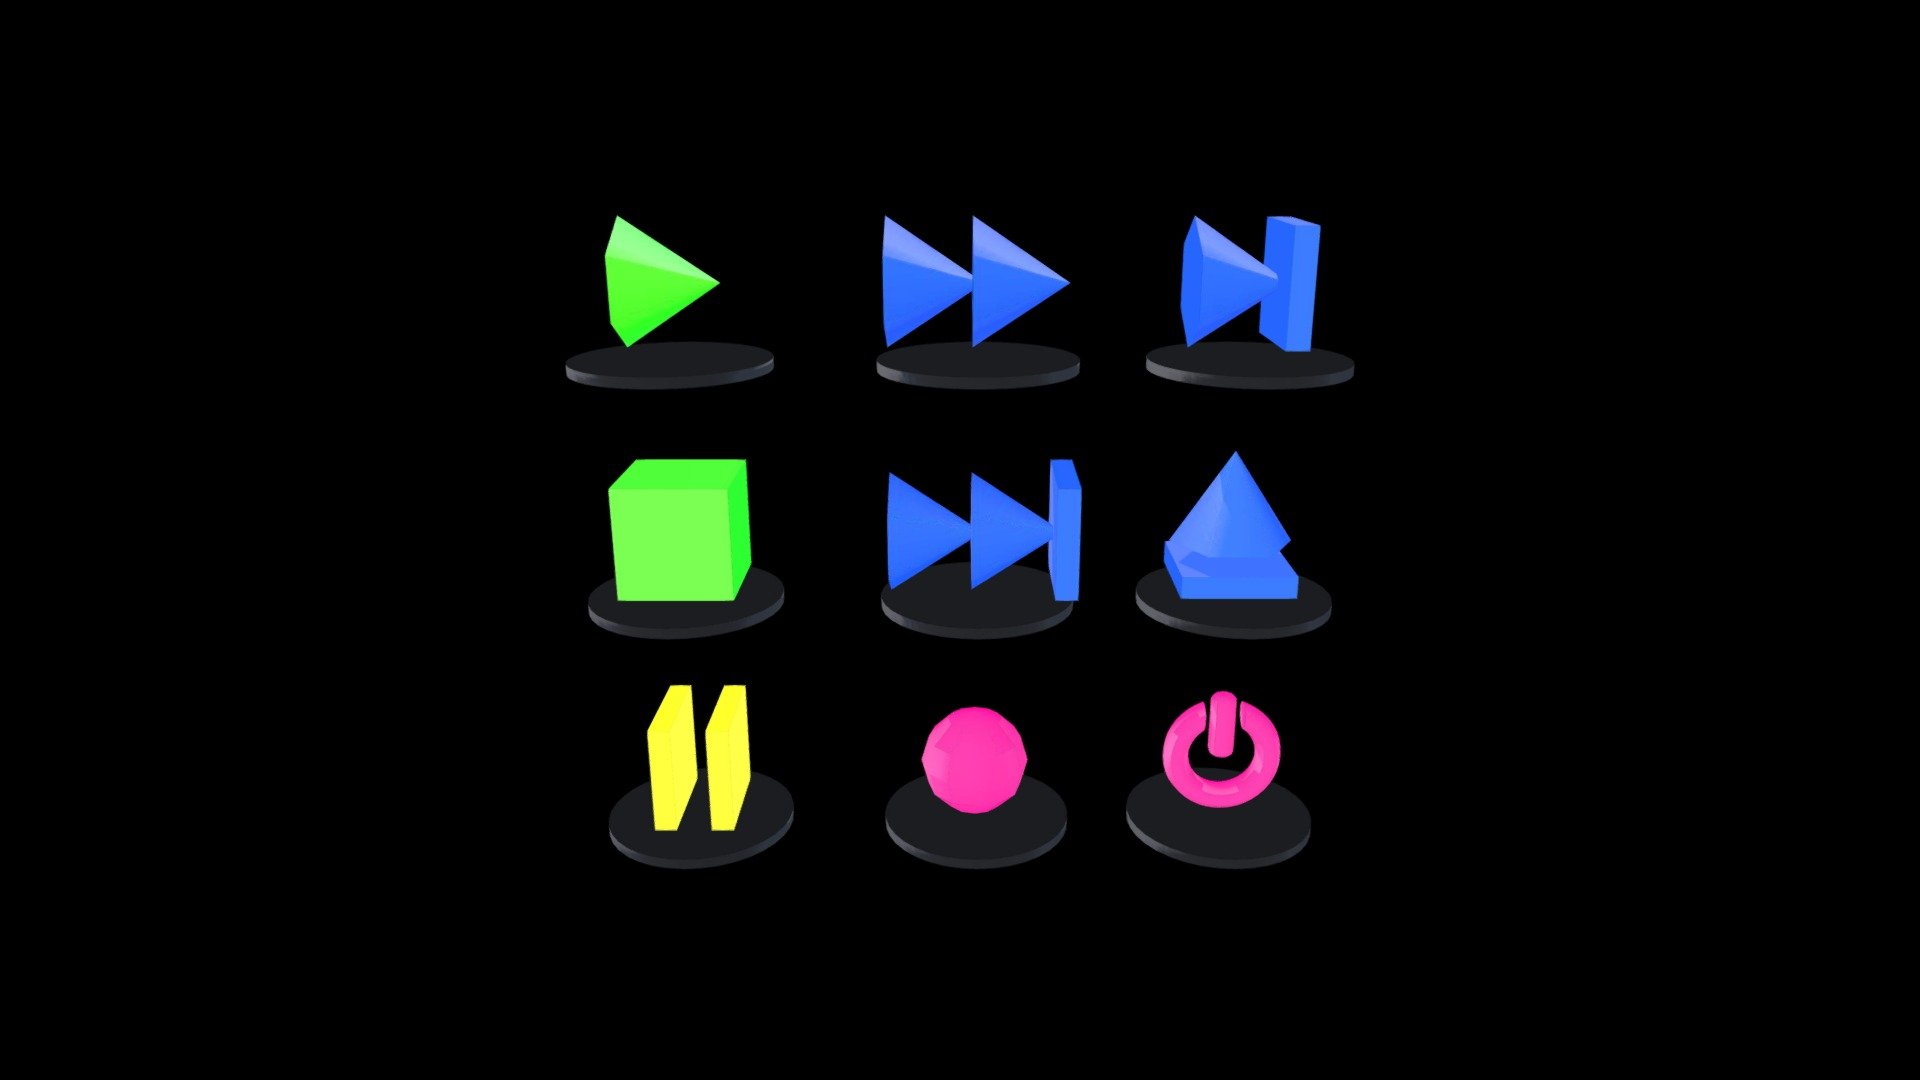 Play /Pause /Stop /Reverse /Record /Off - 3D icons Play music - 3D model by Sparrow (@innasparrow) 3d model